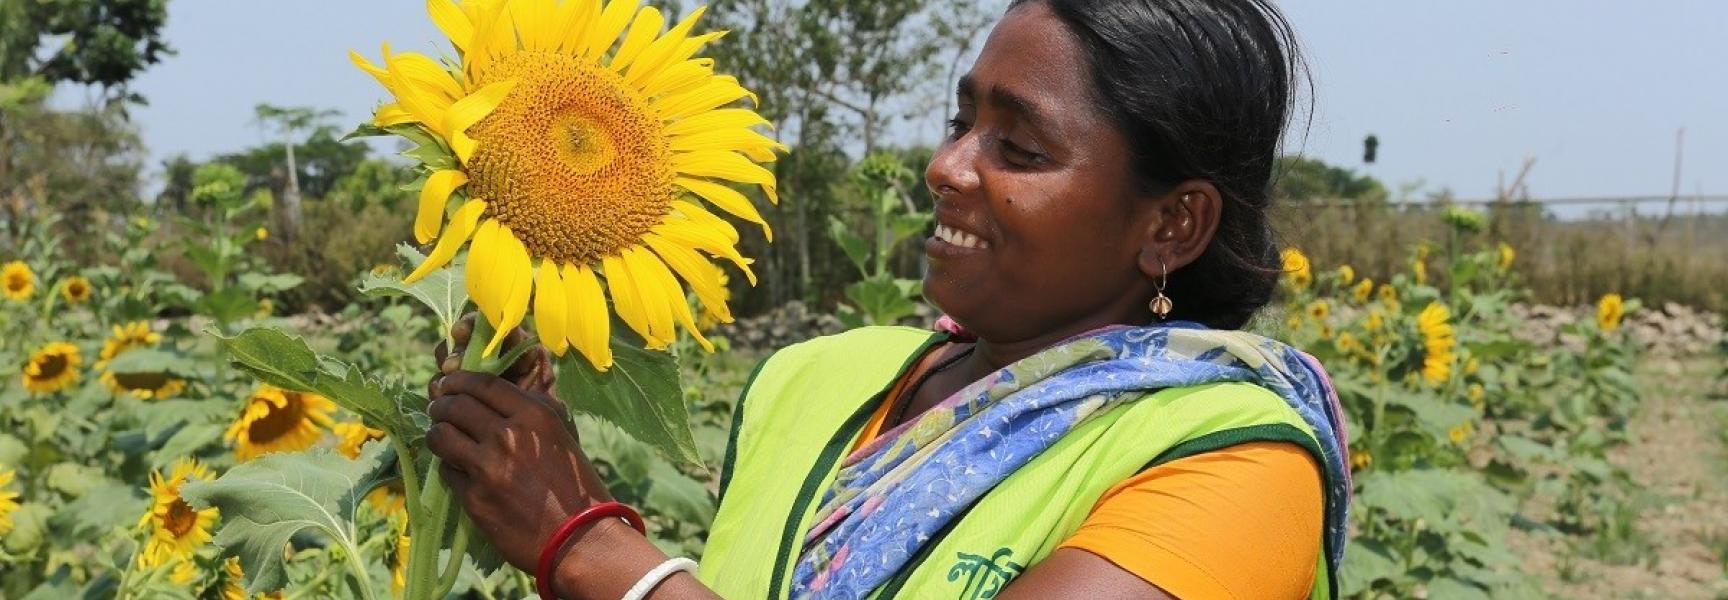 Woman with sunflower in Bangladesh